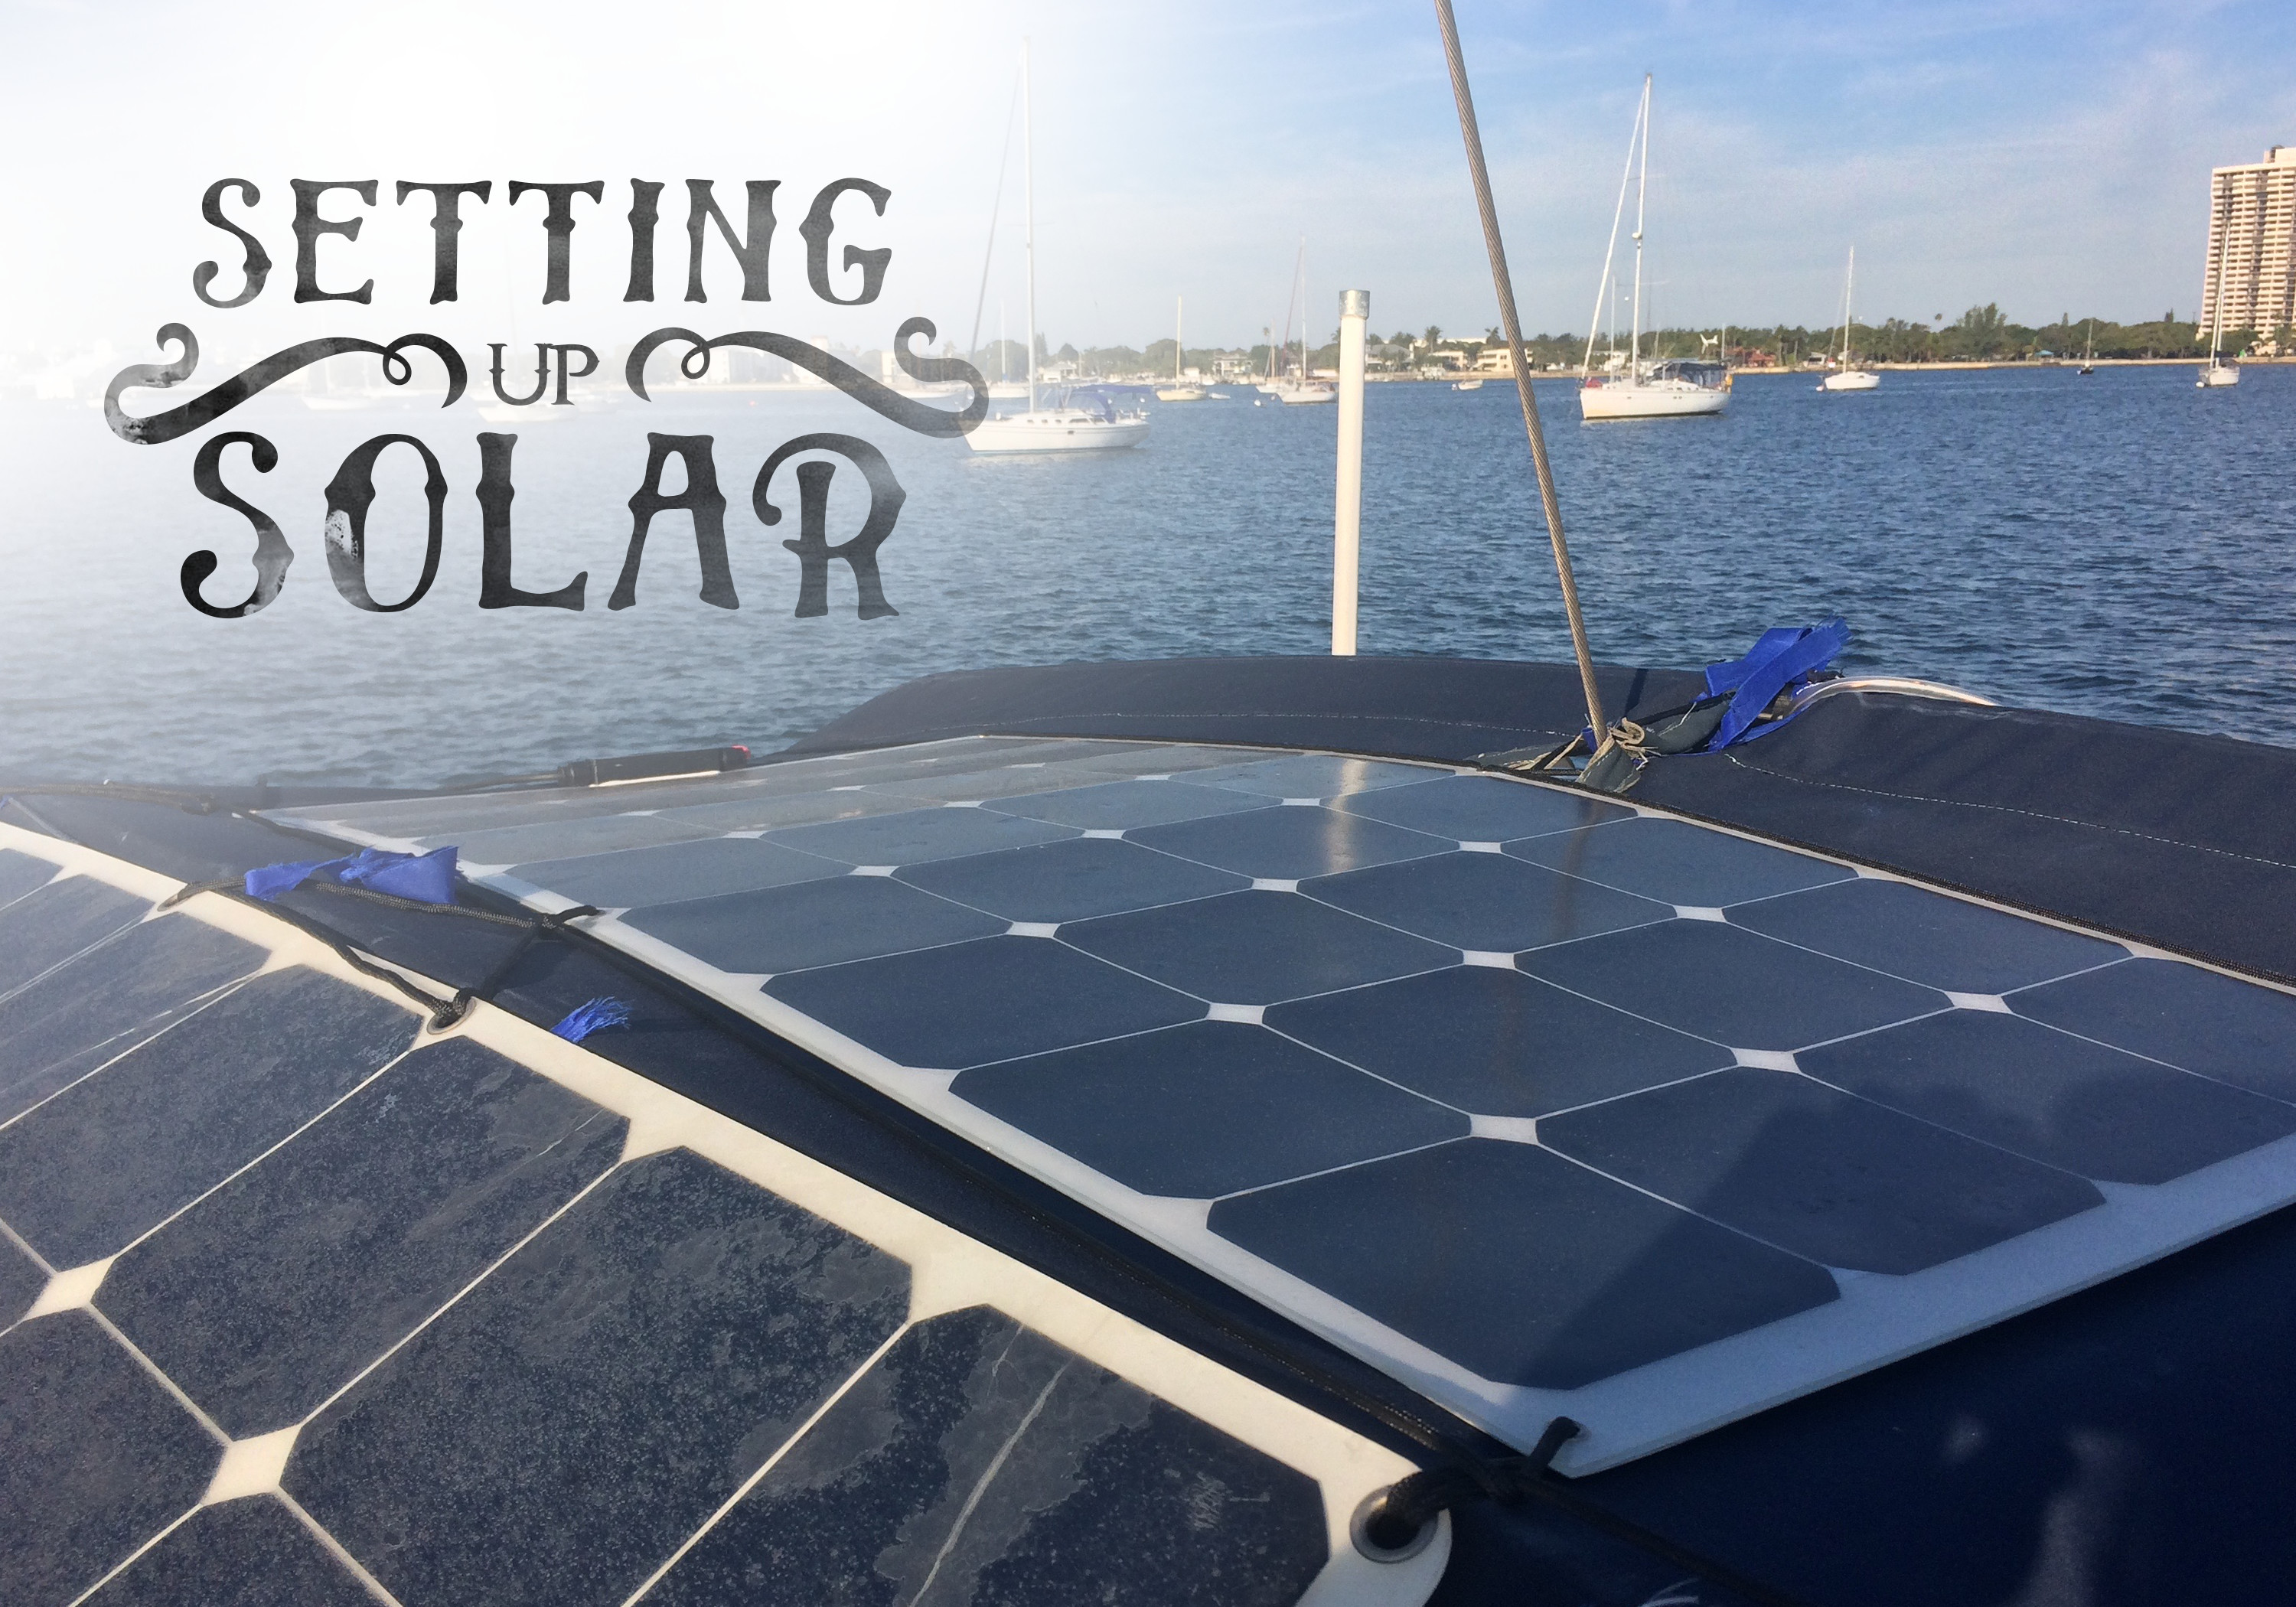 Setting up Solar Panels on Boat, RV, or Off-the-grid Living